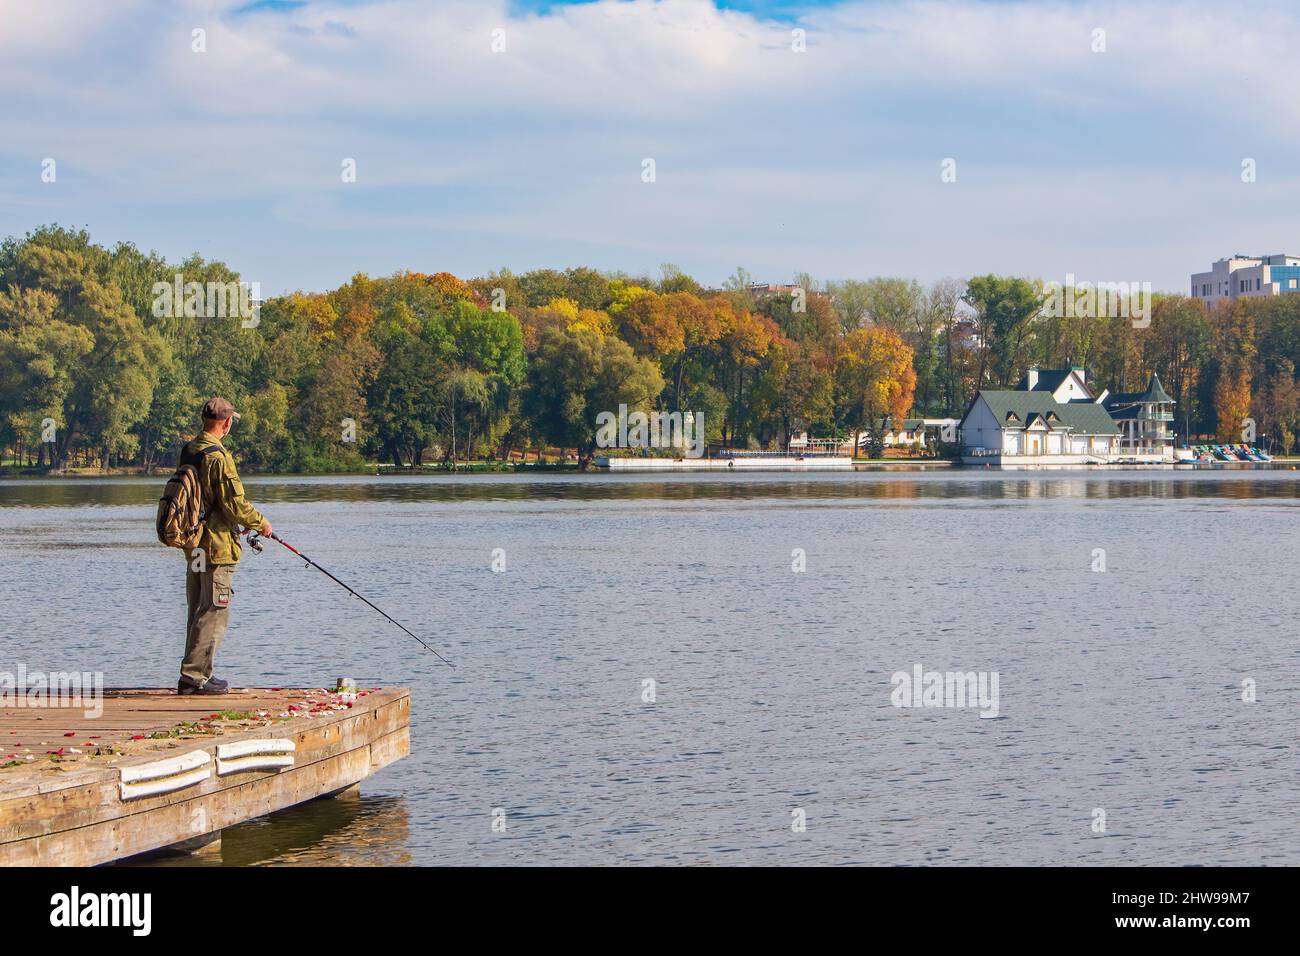 MINSK, BELARUS - October 04, 2015: Fishing in the city. An elderly man with a spinning rod Stock Photo